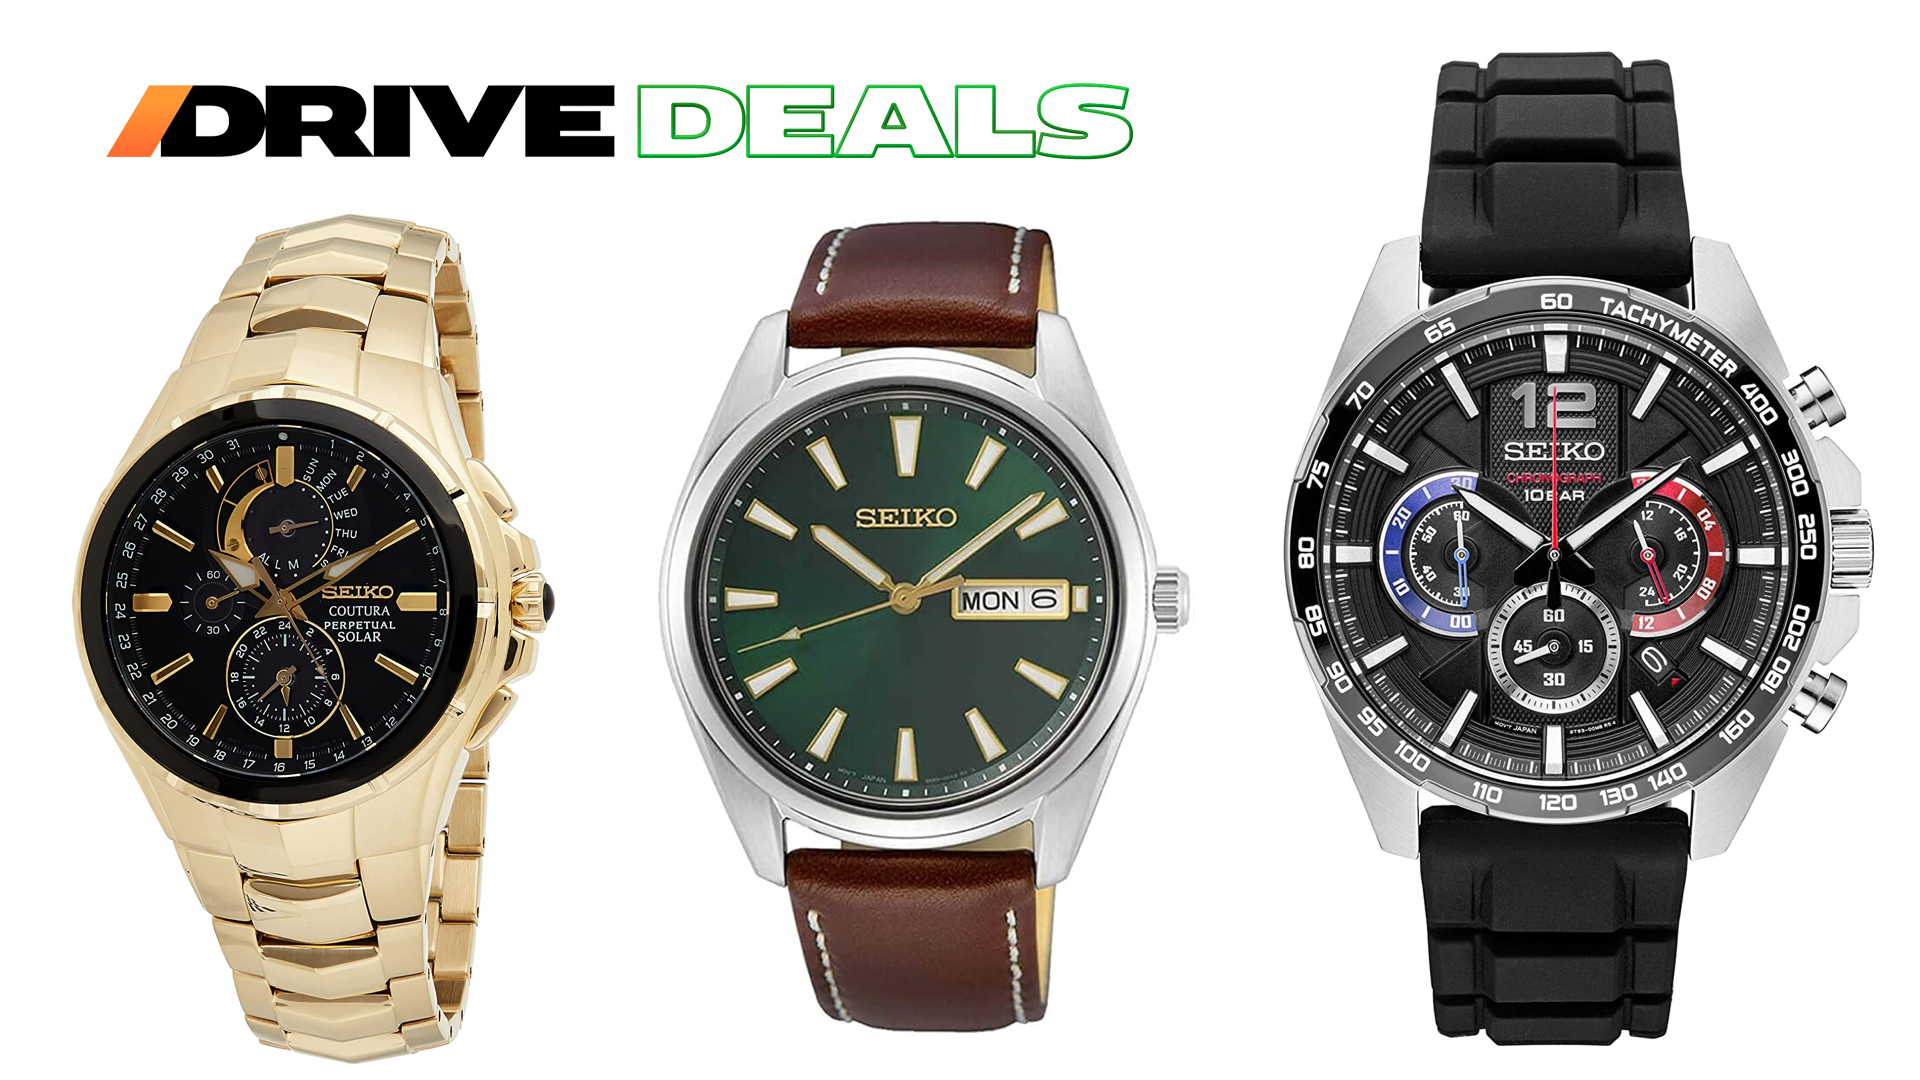 Check Out Amazon's Killer Deals on Seiko Watches | The Drive